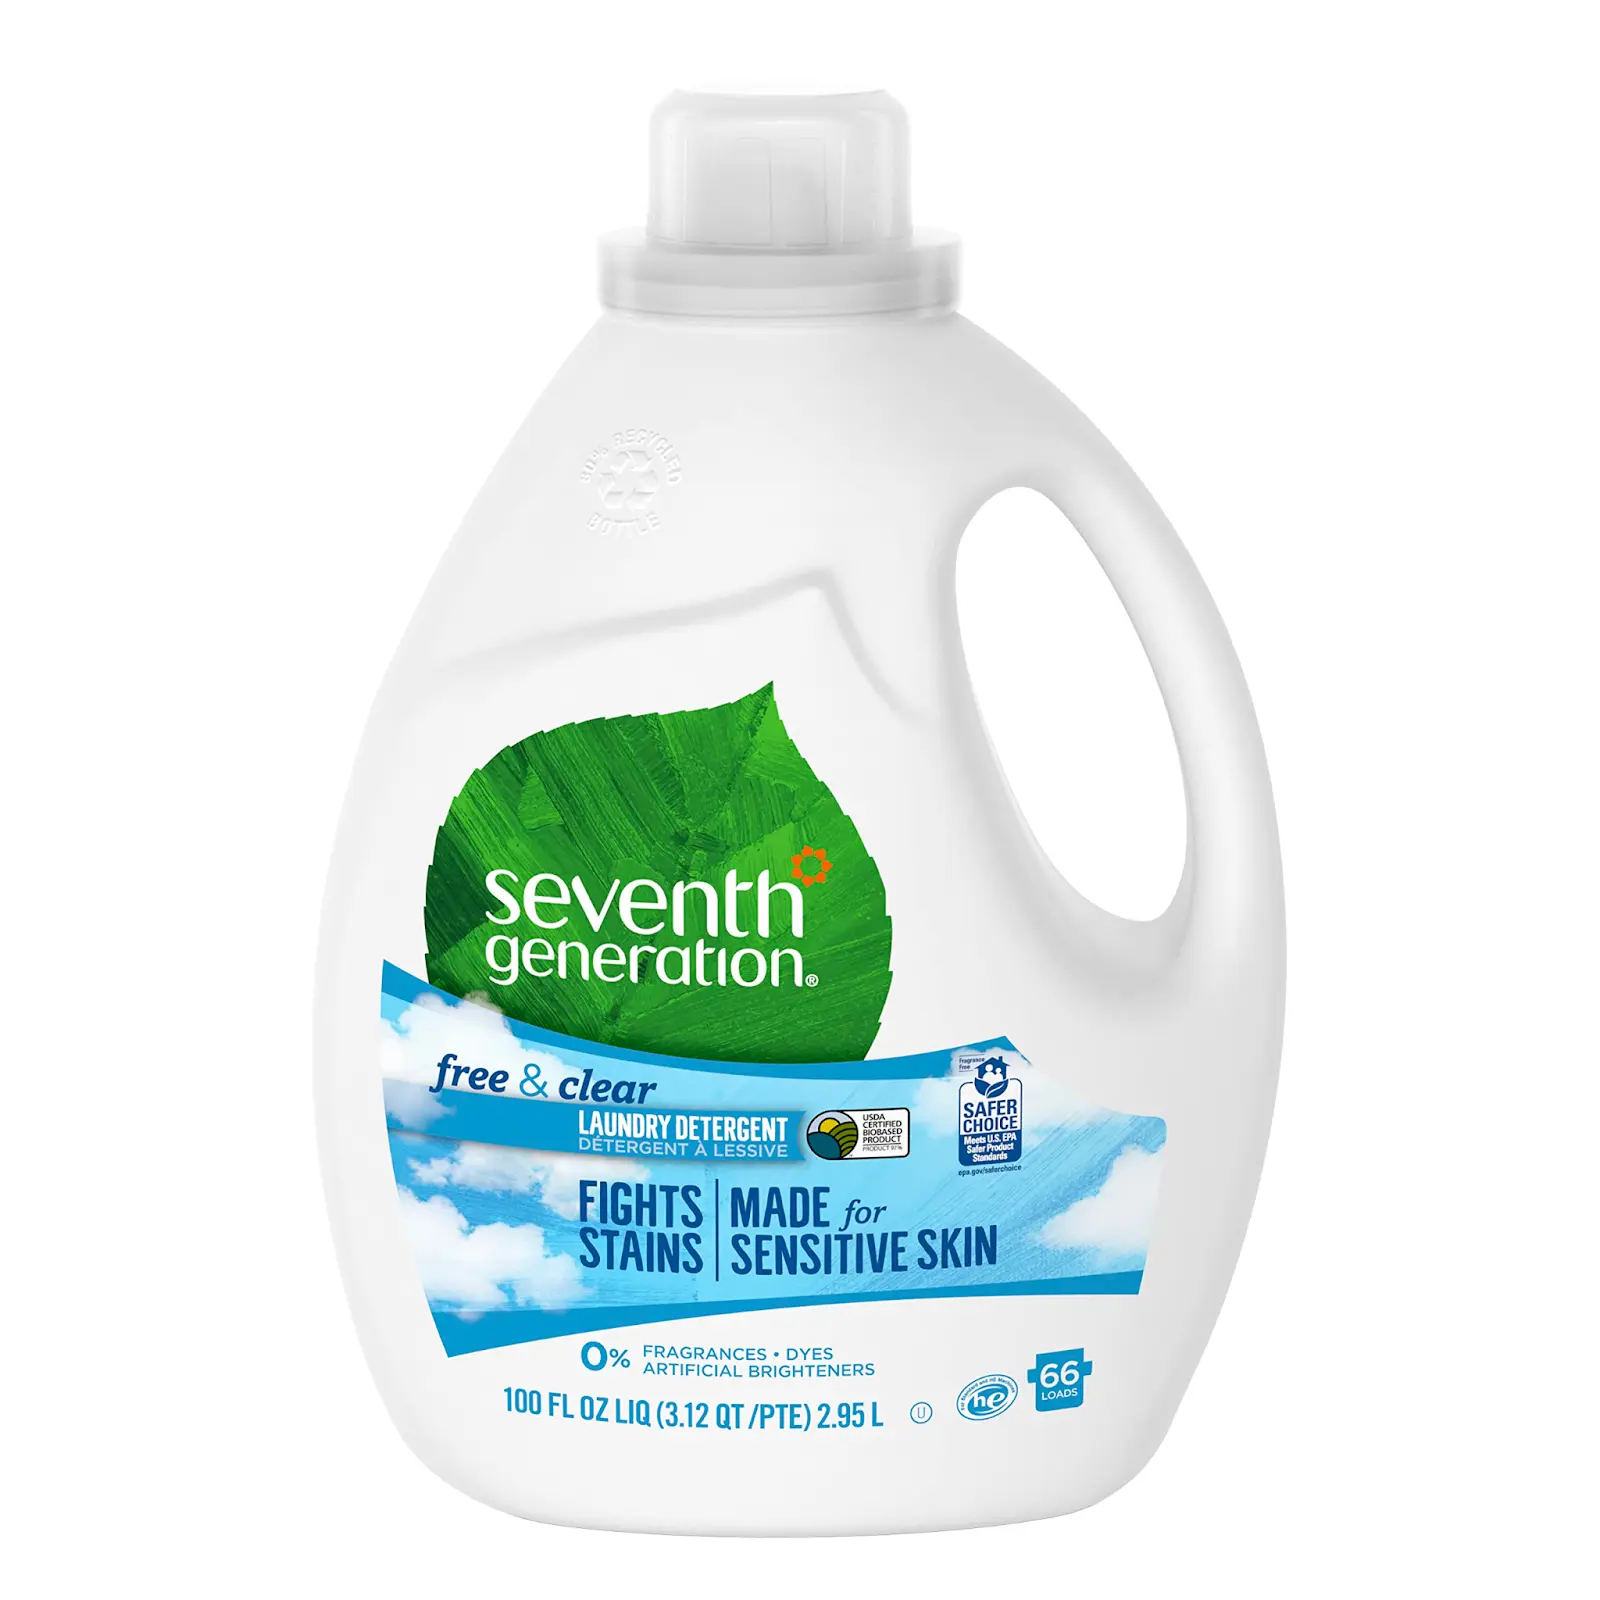 Seventh Generation's free & clear laundry detergent 